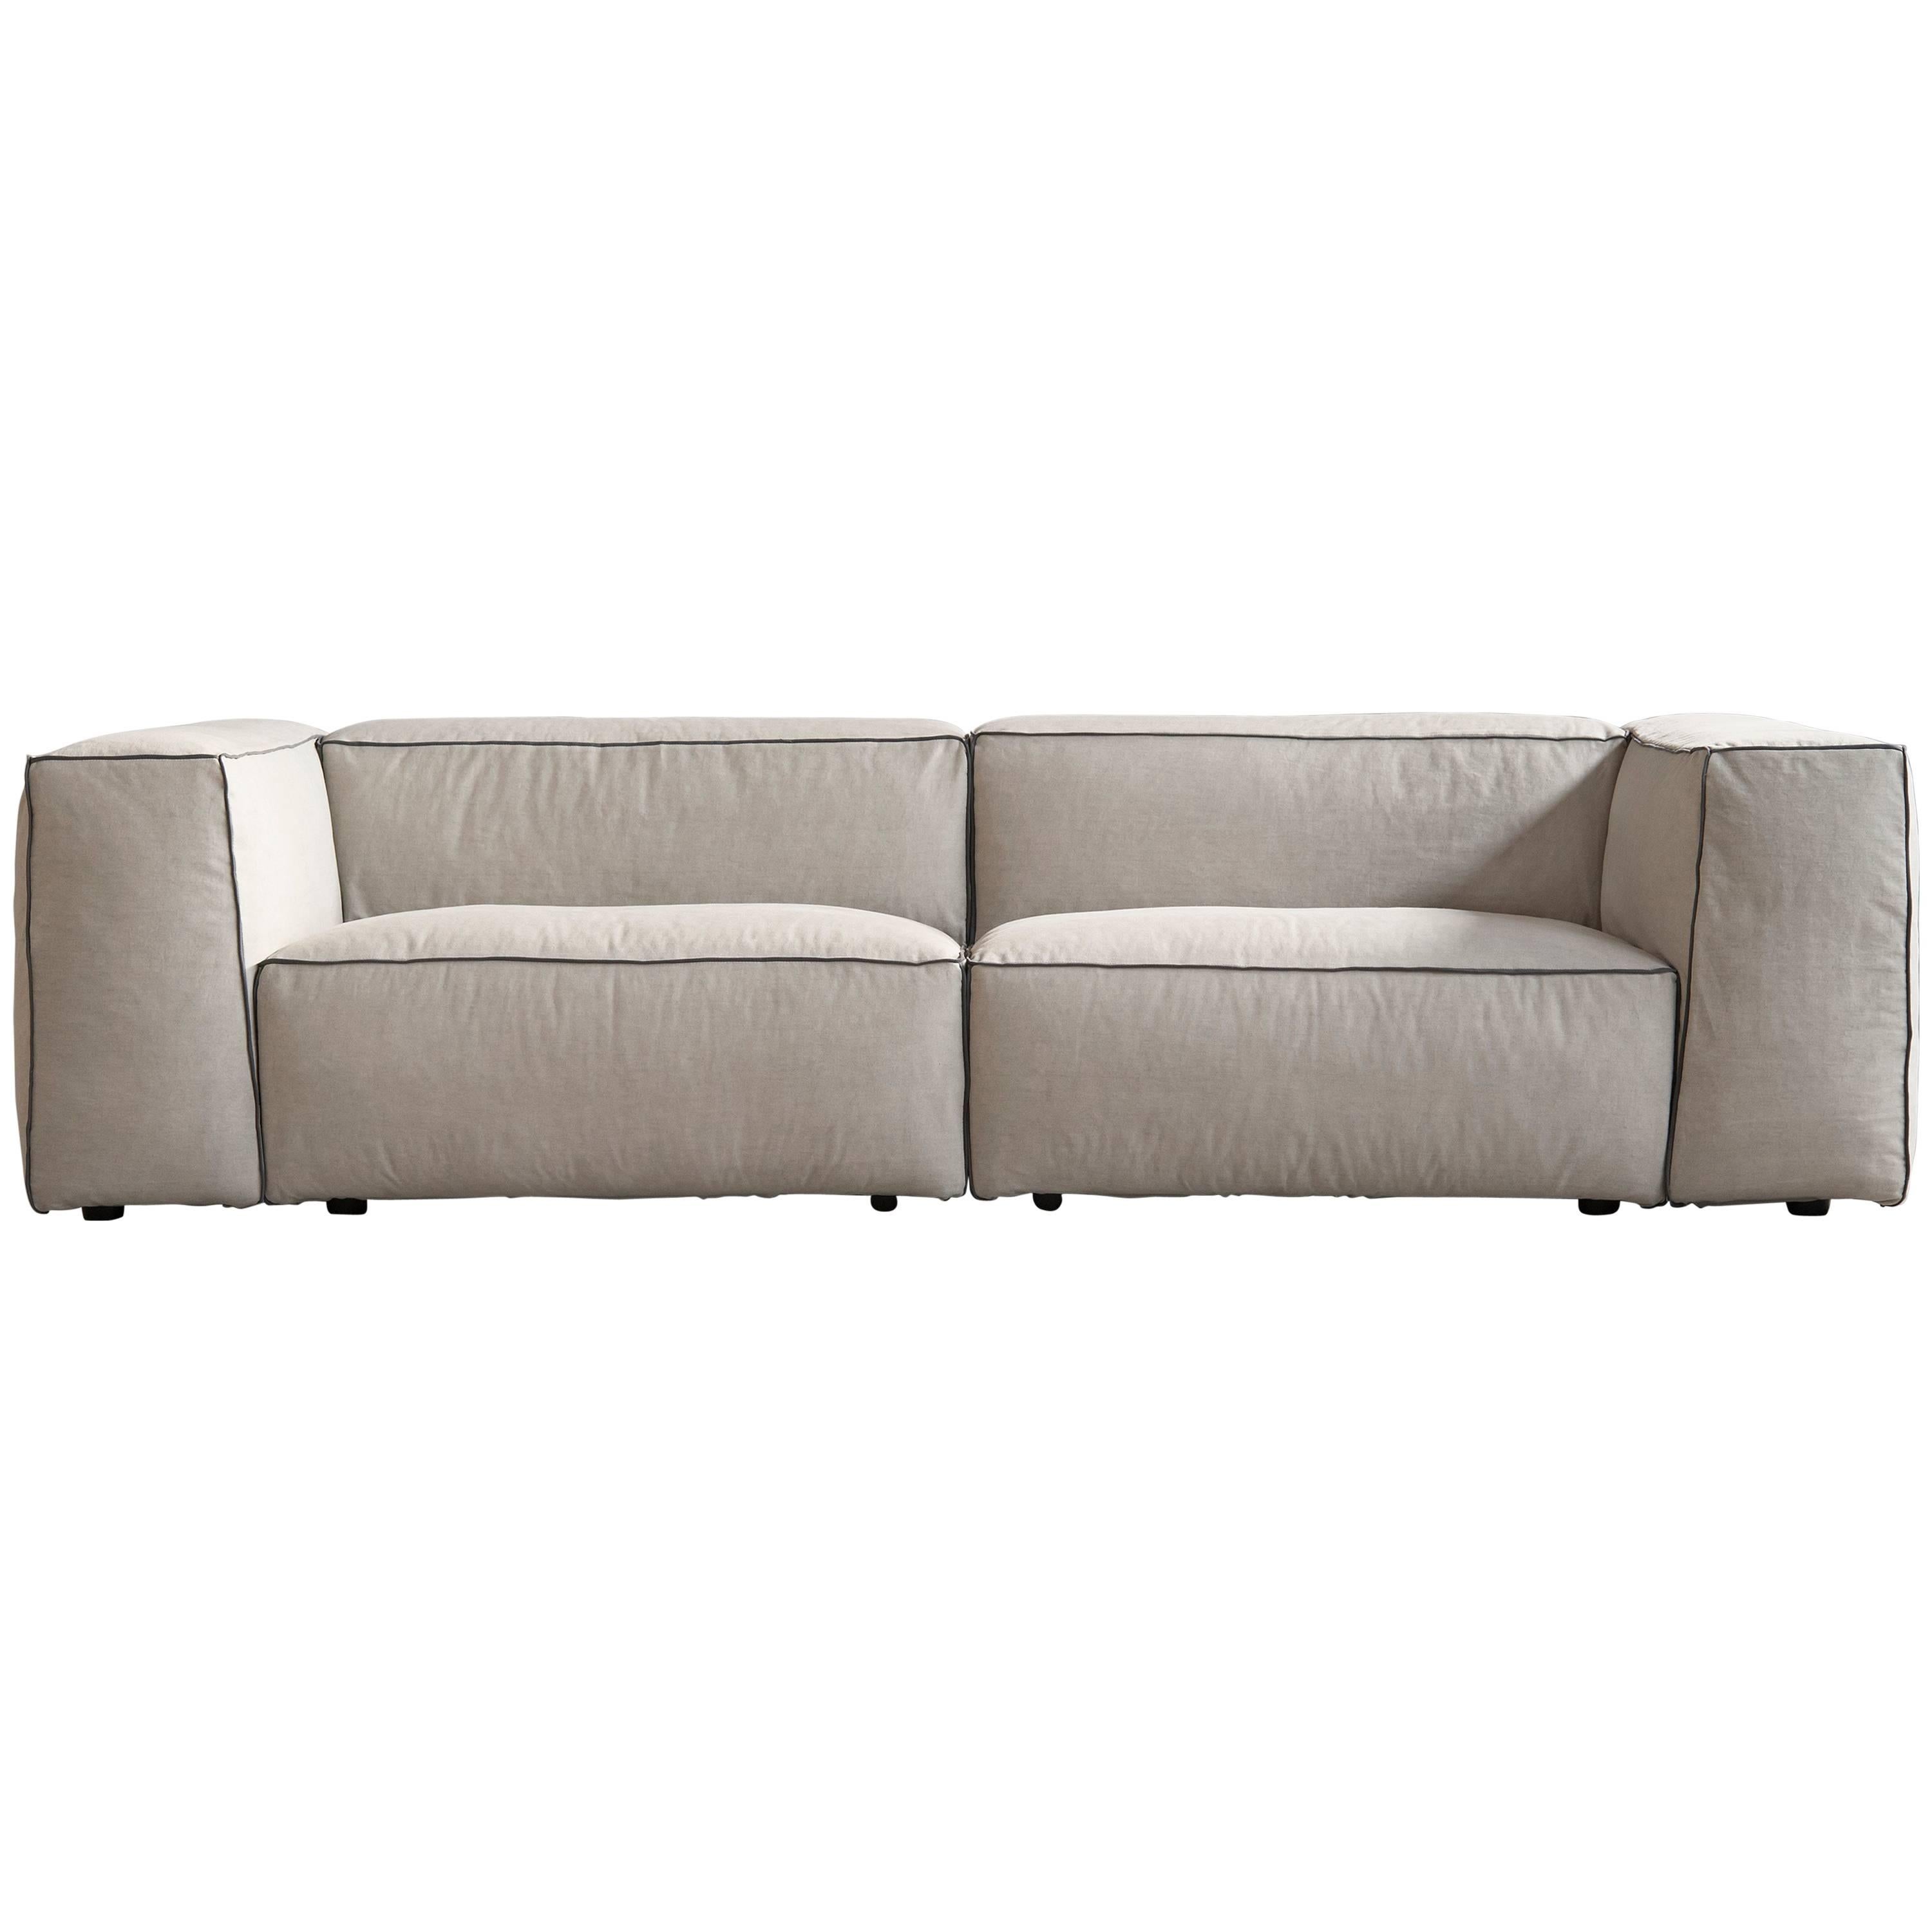 Sifnos Handmade Contemporary Sofa, Modular, Fabric Cover, Fixed Seat & Backrest For Sale